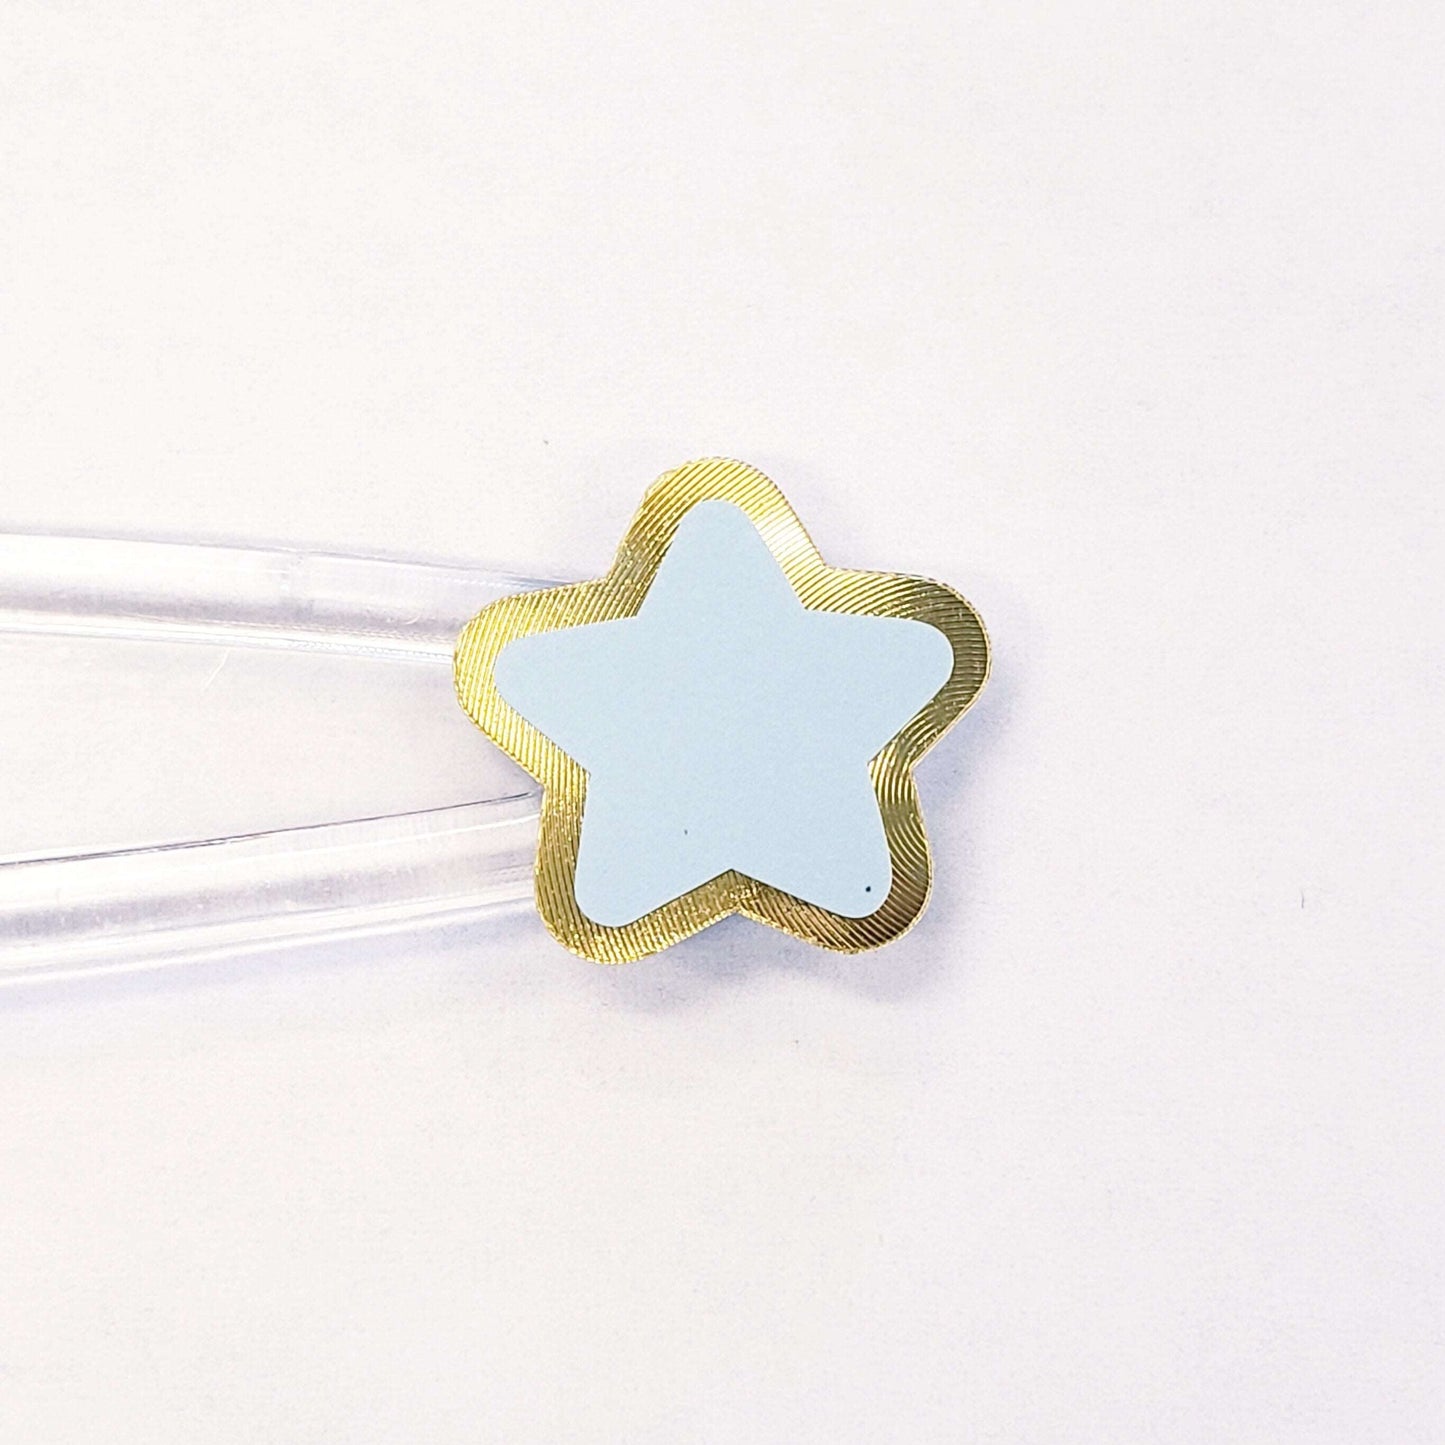 Pastel Rainbow Star Stickers, set of 70 small soft colored kawaii stars for cards, journals, envelopes, invitations, laptops and crafts.